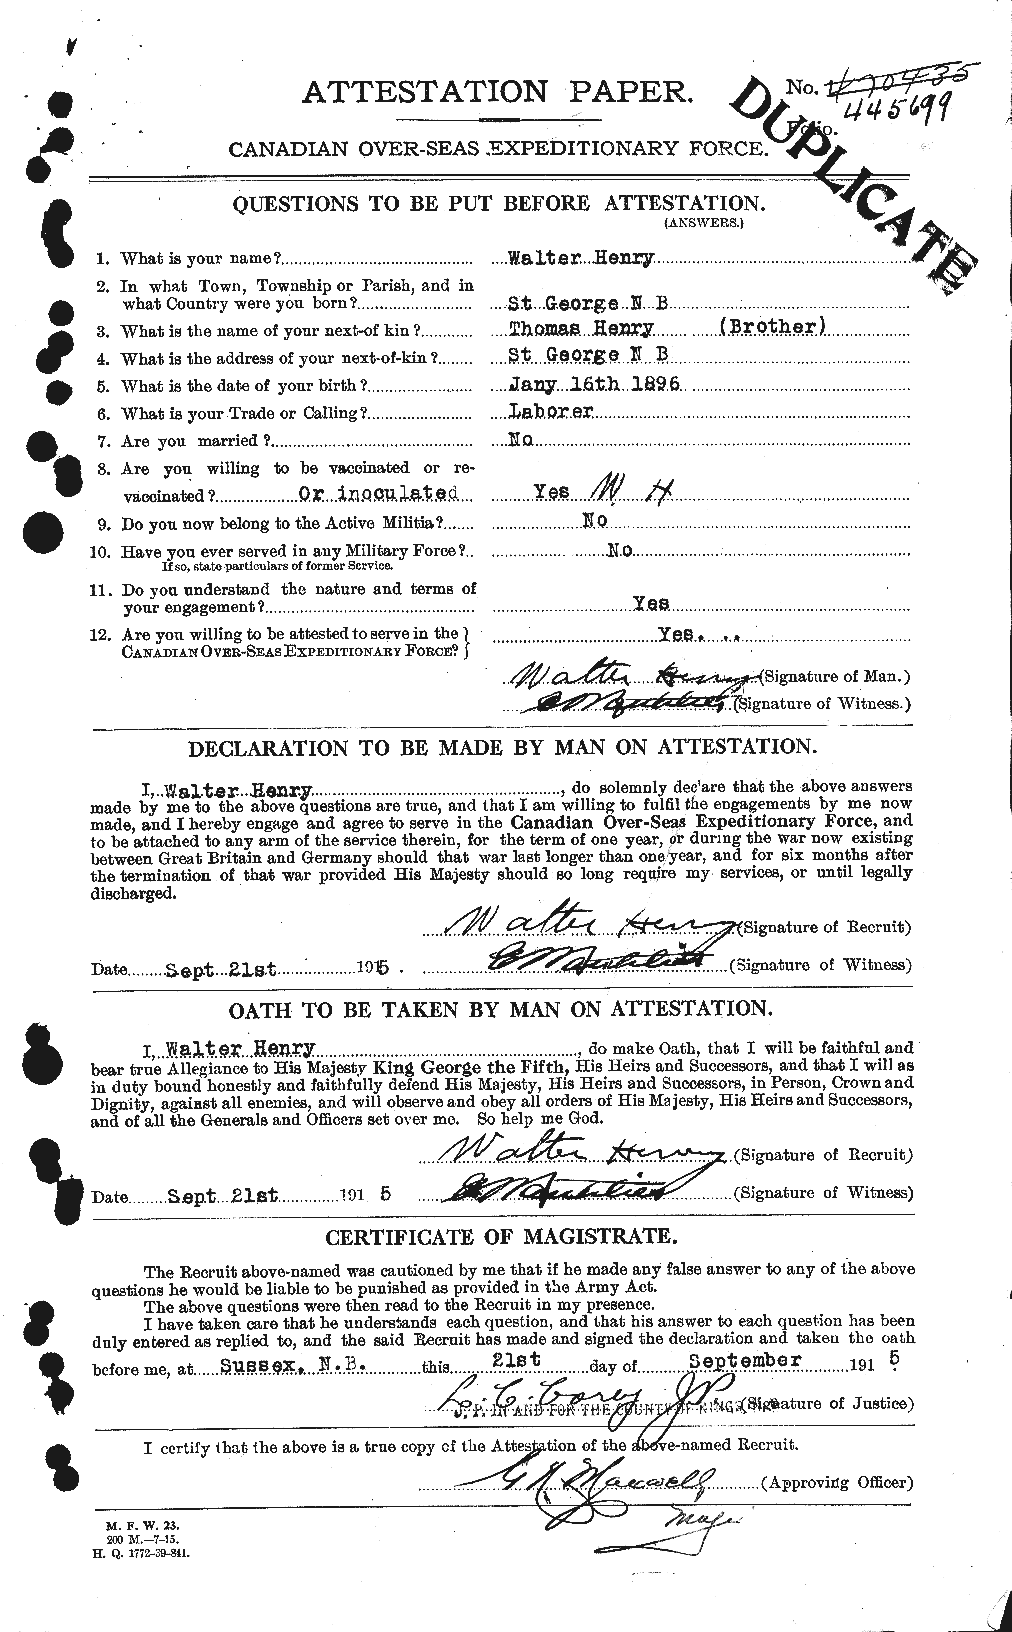 Personnel Records of the First World War - CEF 387754a